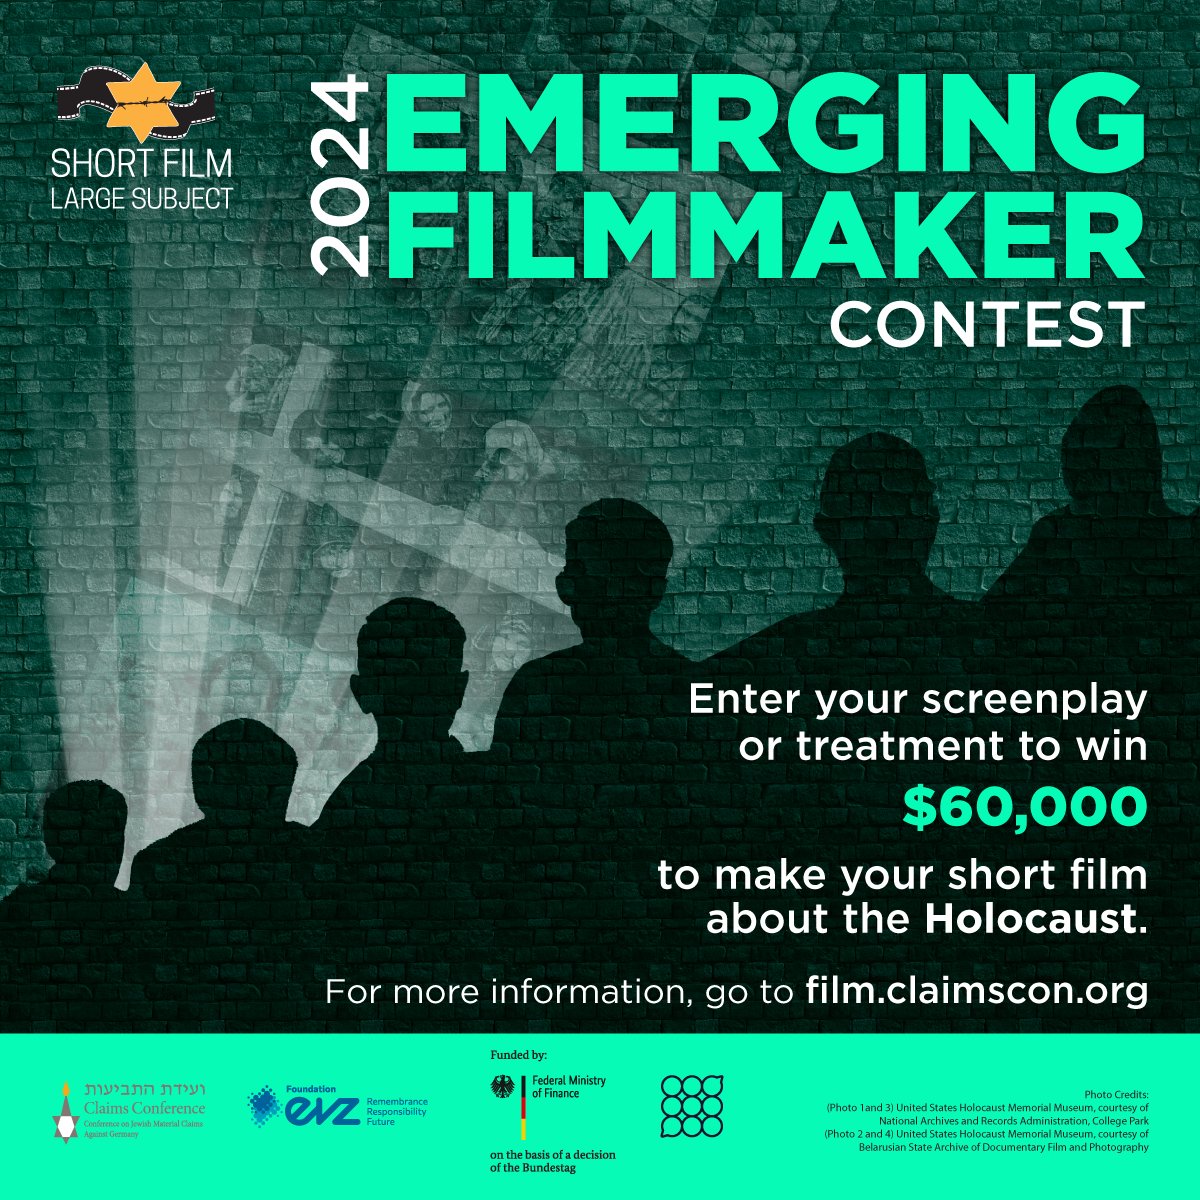 Recognizing the potential of movies to reach large numbers of people and to educate and spark powerful discussions, the Claims Conference is proud to announce applications are open for the Claims Conference's 2024 Short Film, Large Subject: Emerging Filmmaker Contest - a…